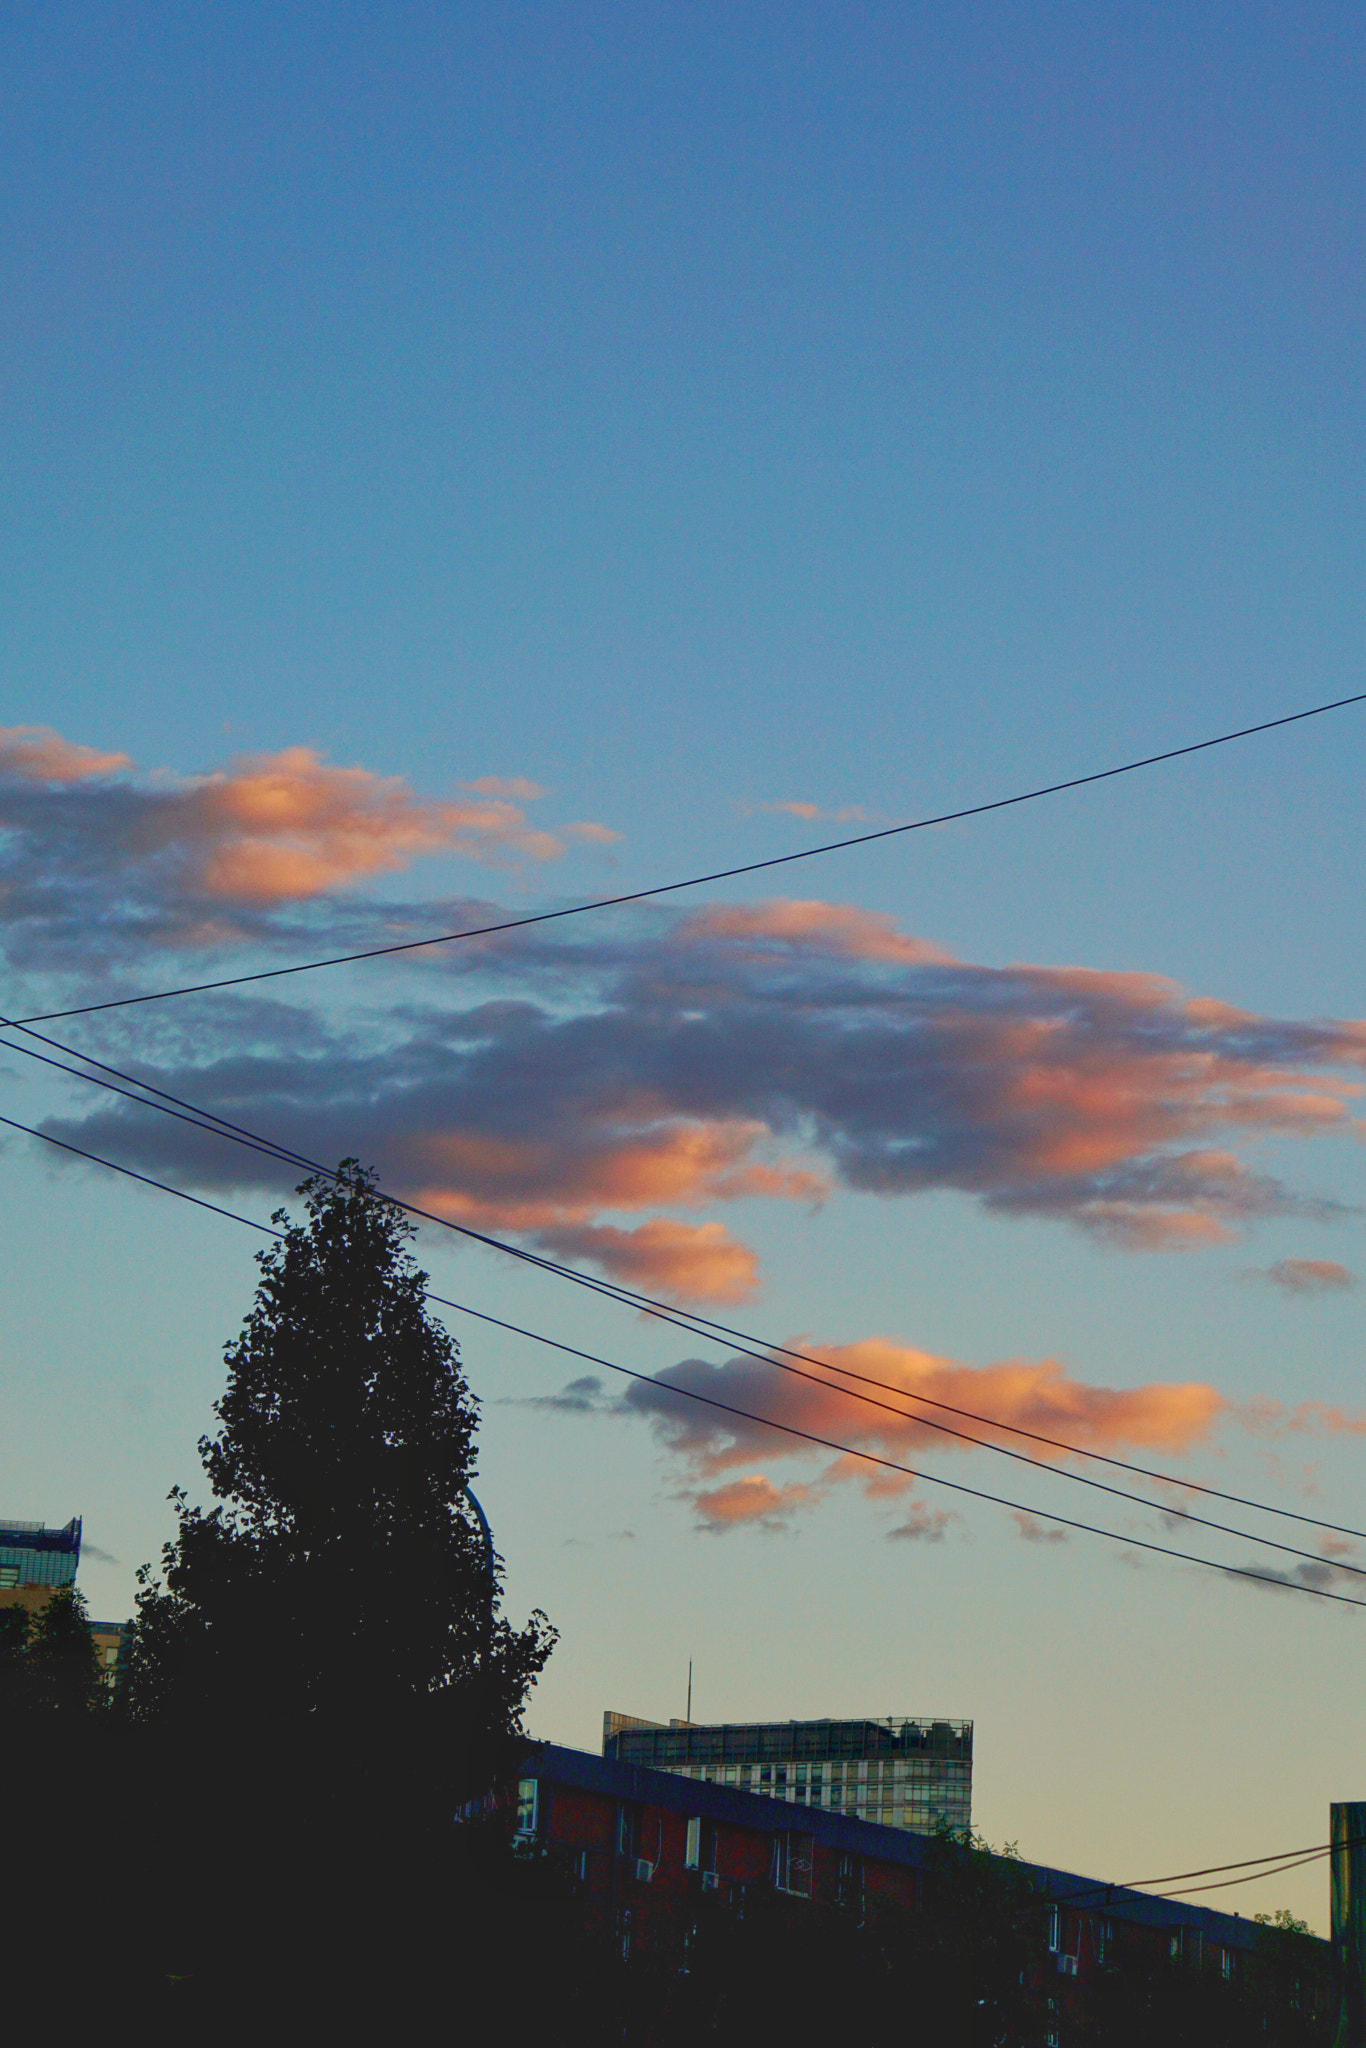 Sony a5100 sample photo. Sunset, clouds and lines photography